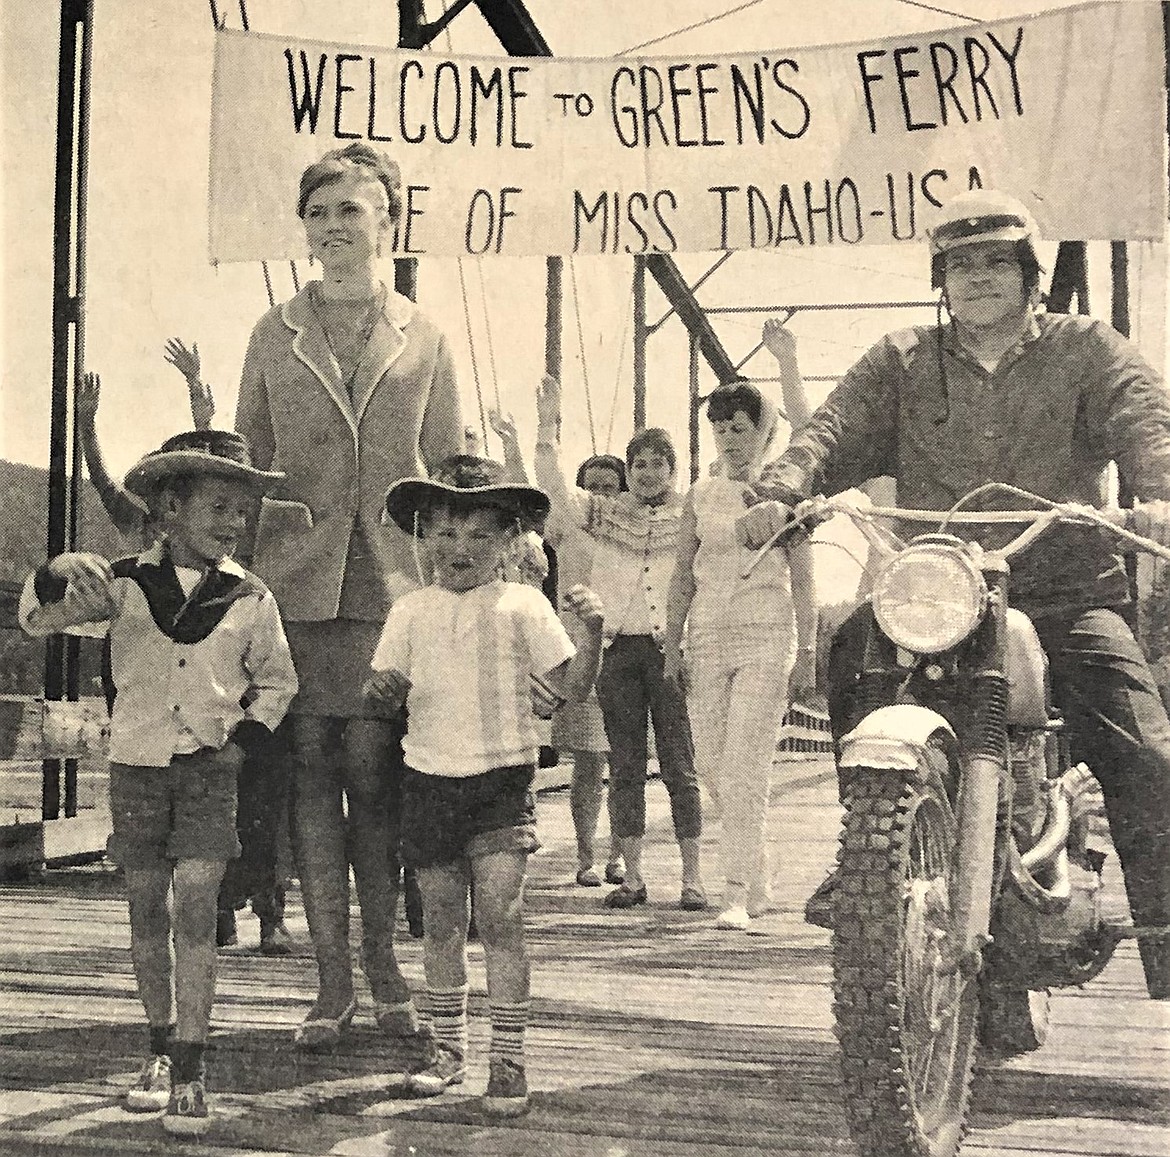 Anna Marie Evenson is escorted across the Green's Ferry bridge by her neighbors.